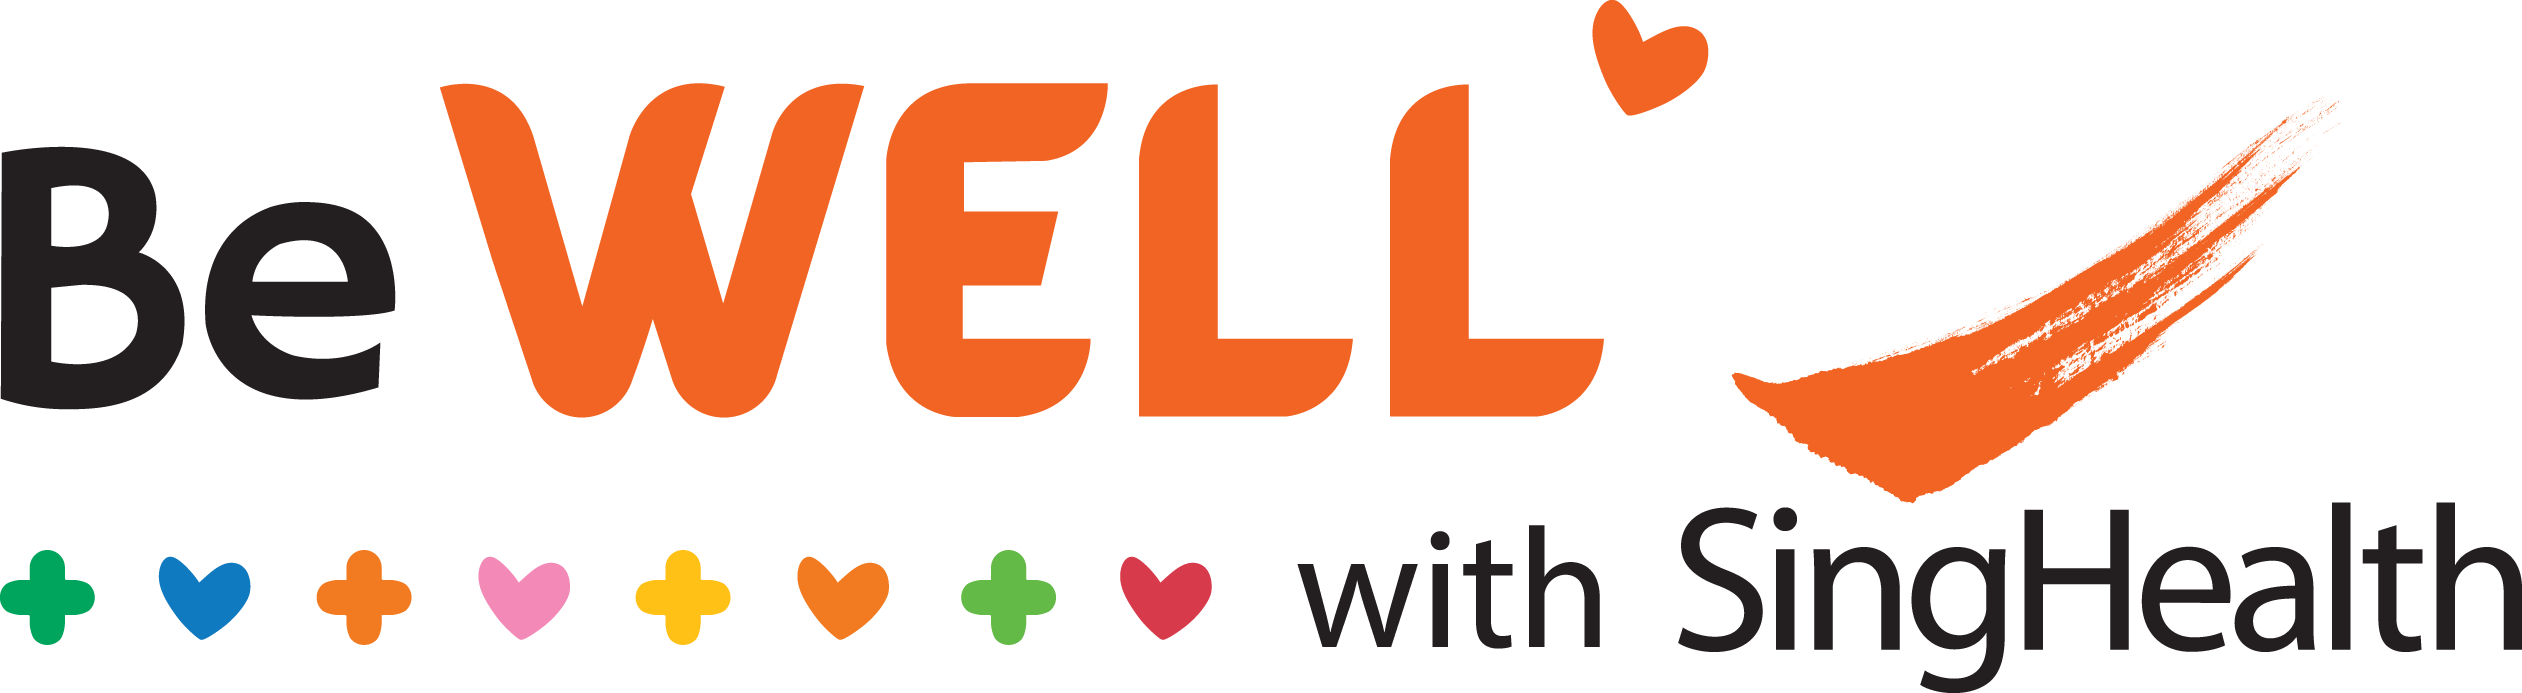 be well logo.png